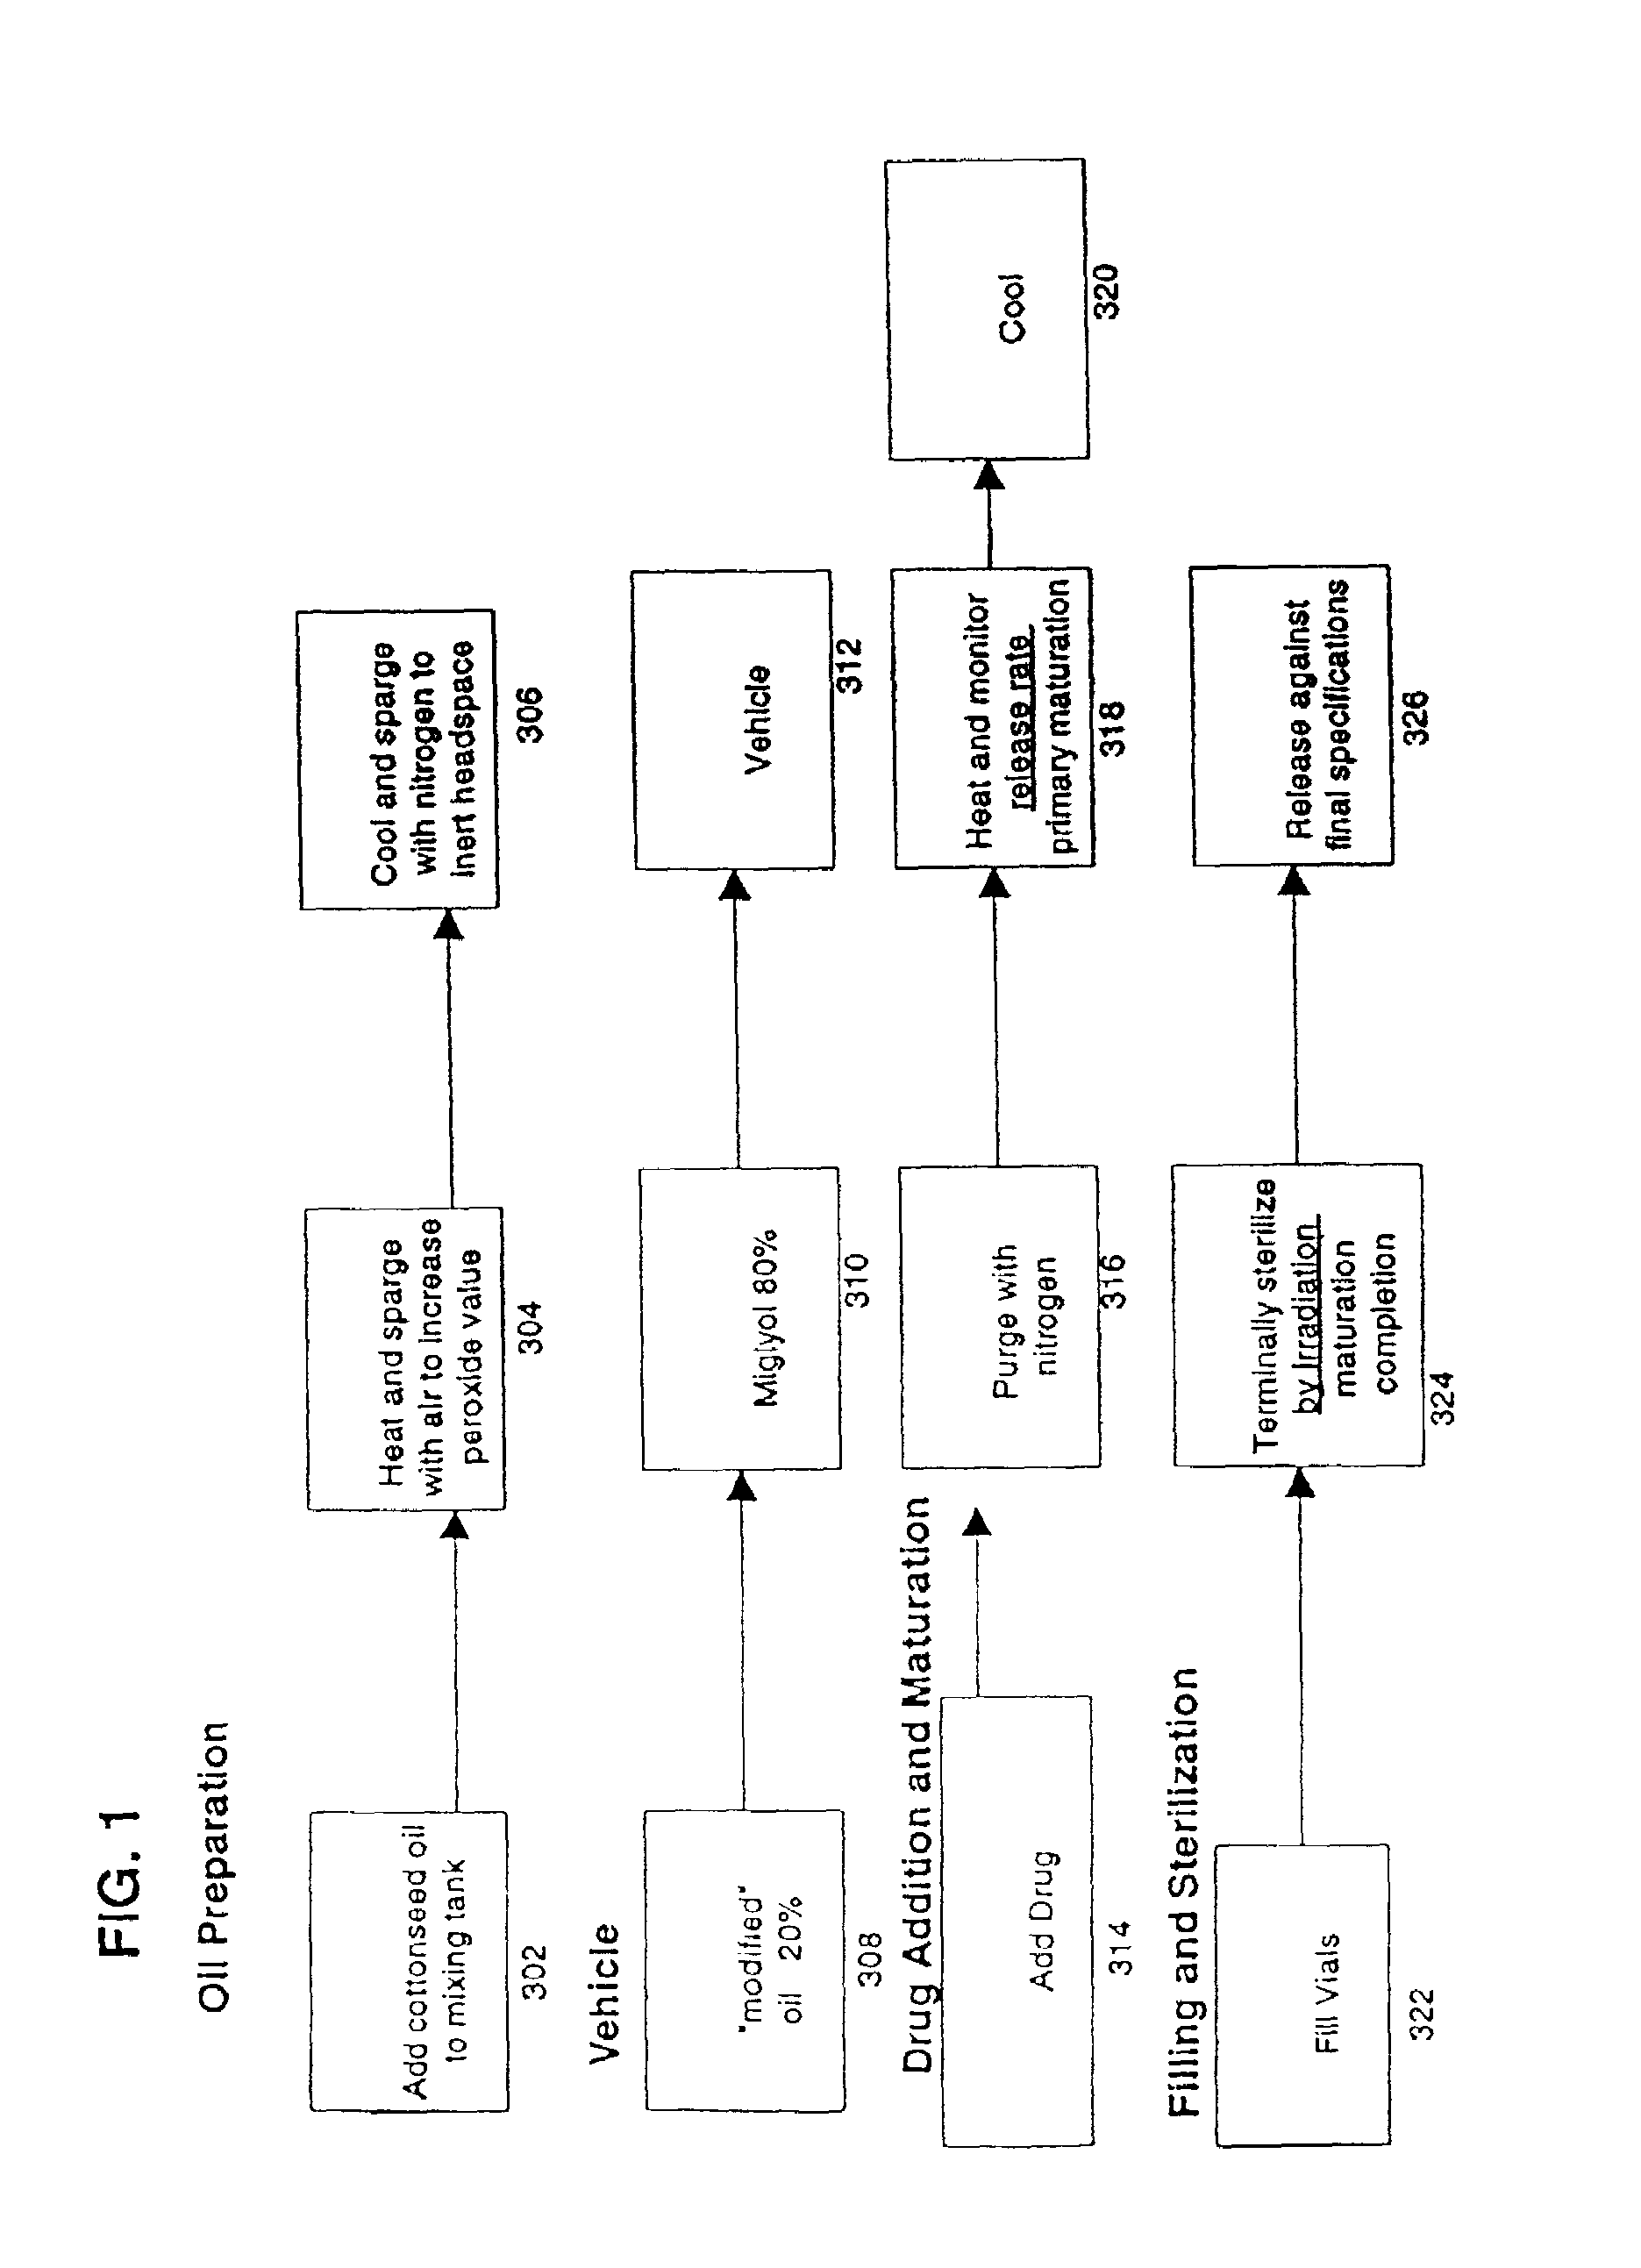 Pharmaceutical composition having modified carrier